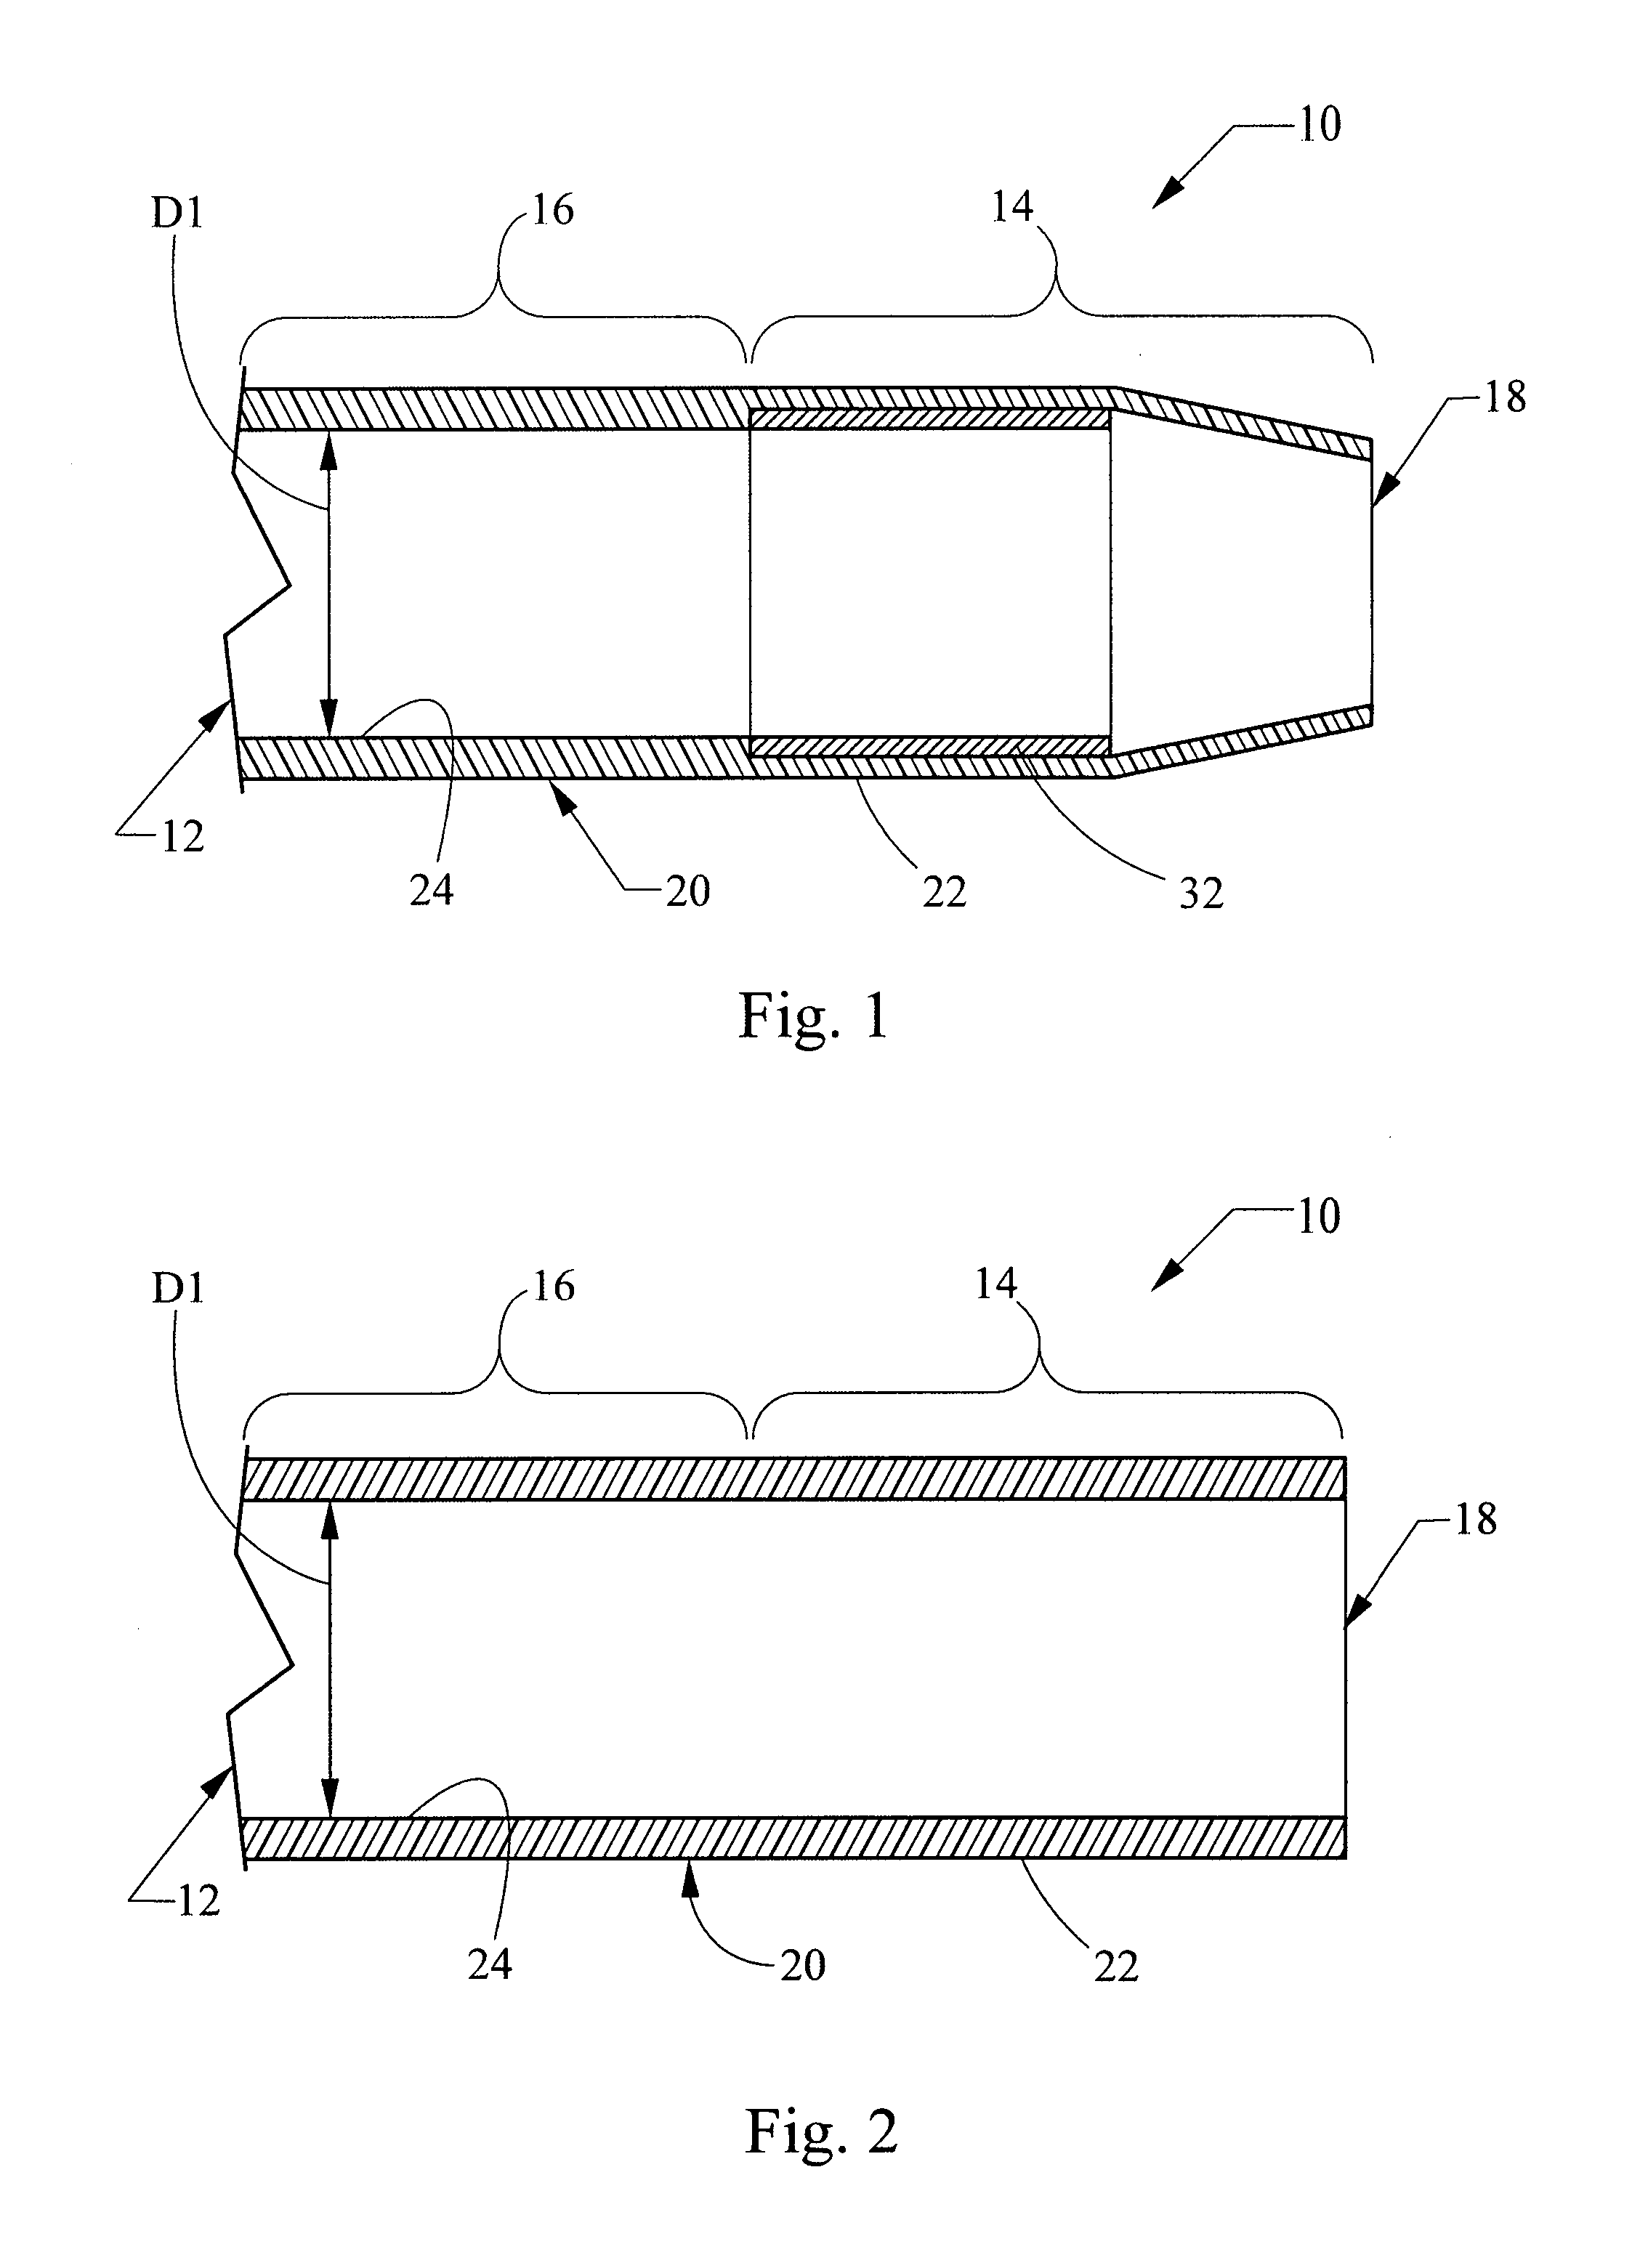 Endovascular device tip assembly incorporating a marker device and method for making the same